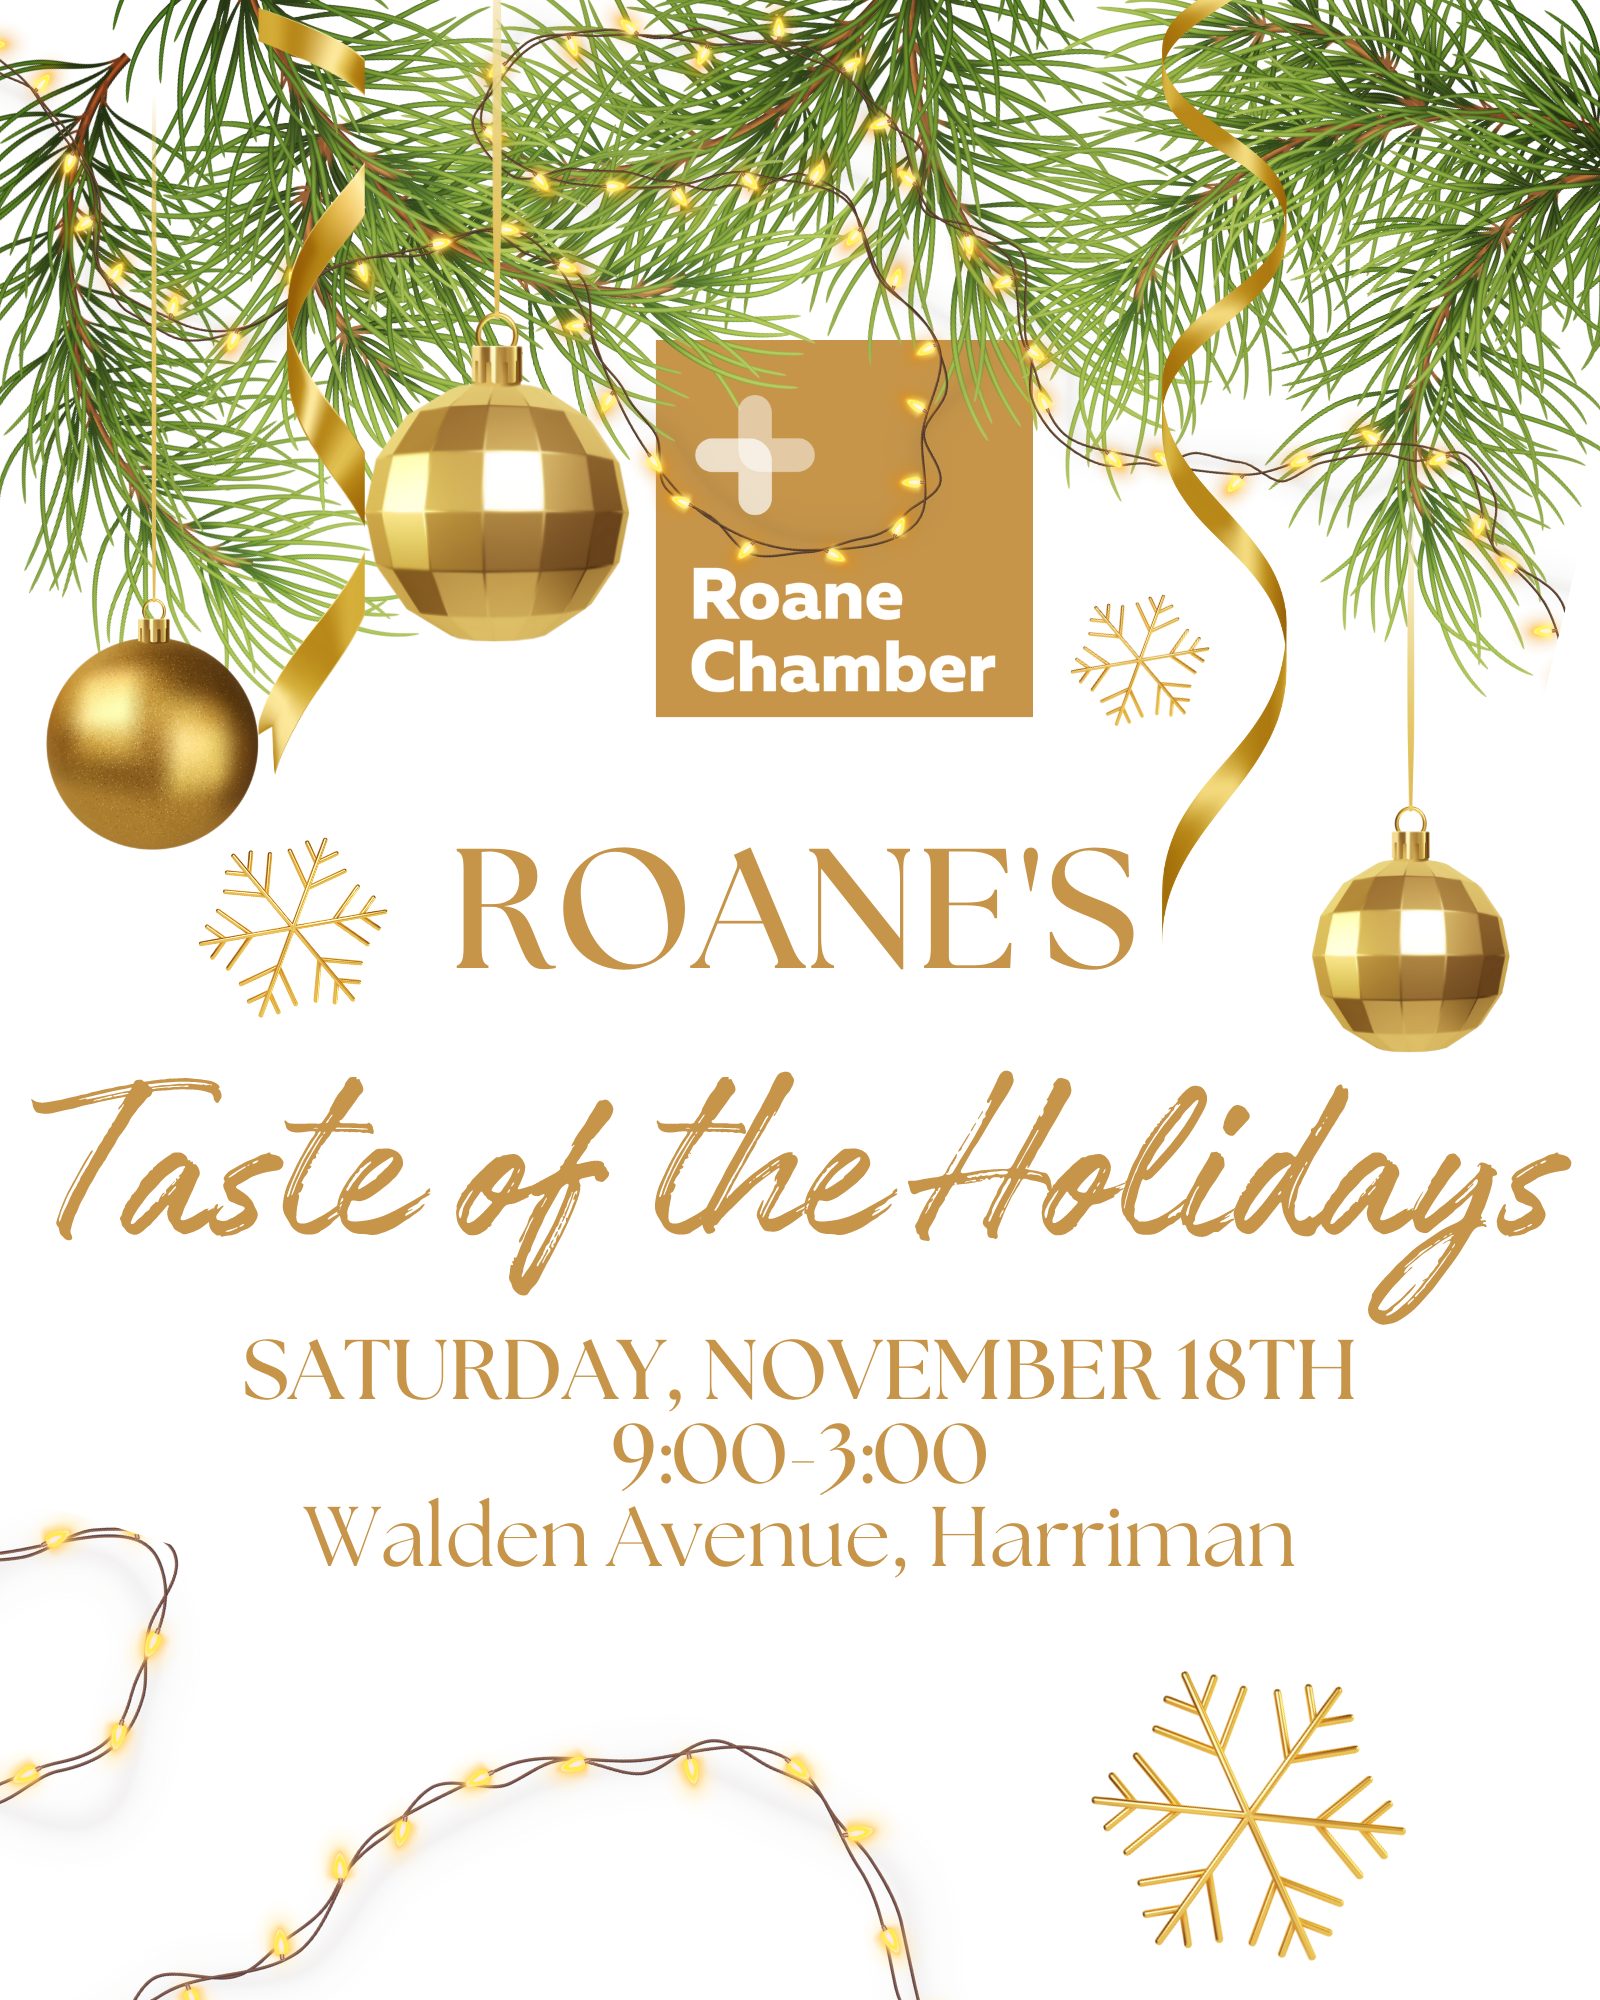 Roane's Taste of the Holidays (8 × 10 in) (3)